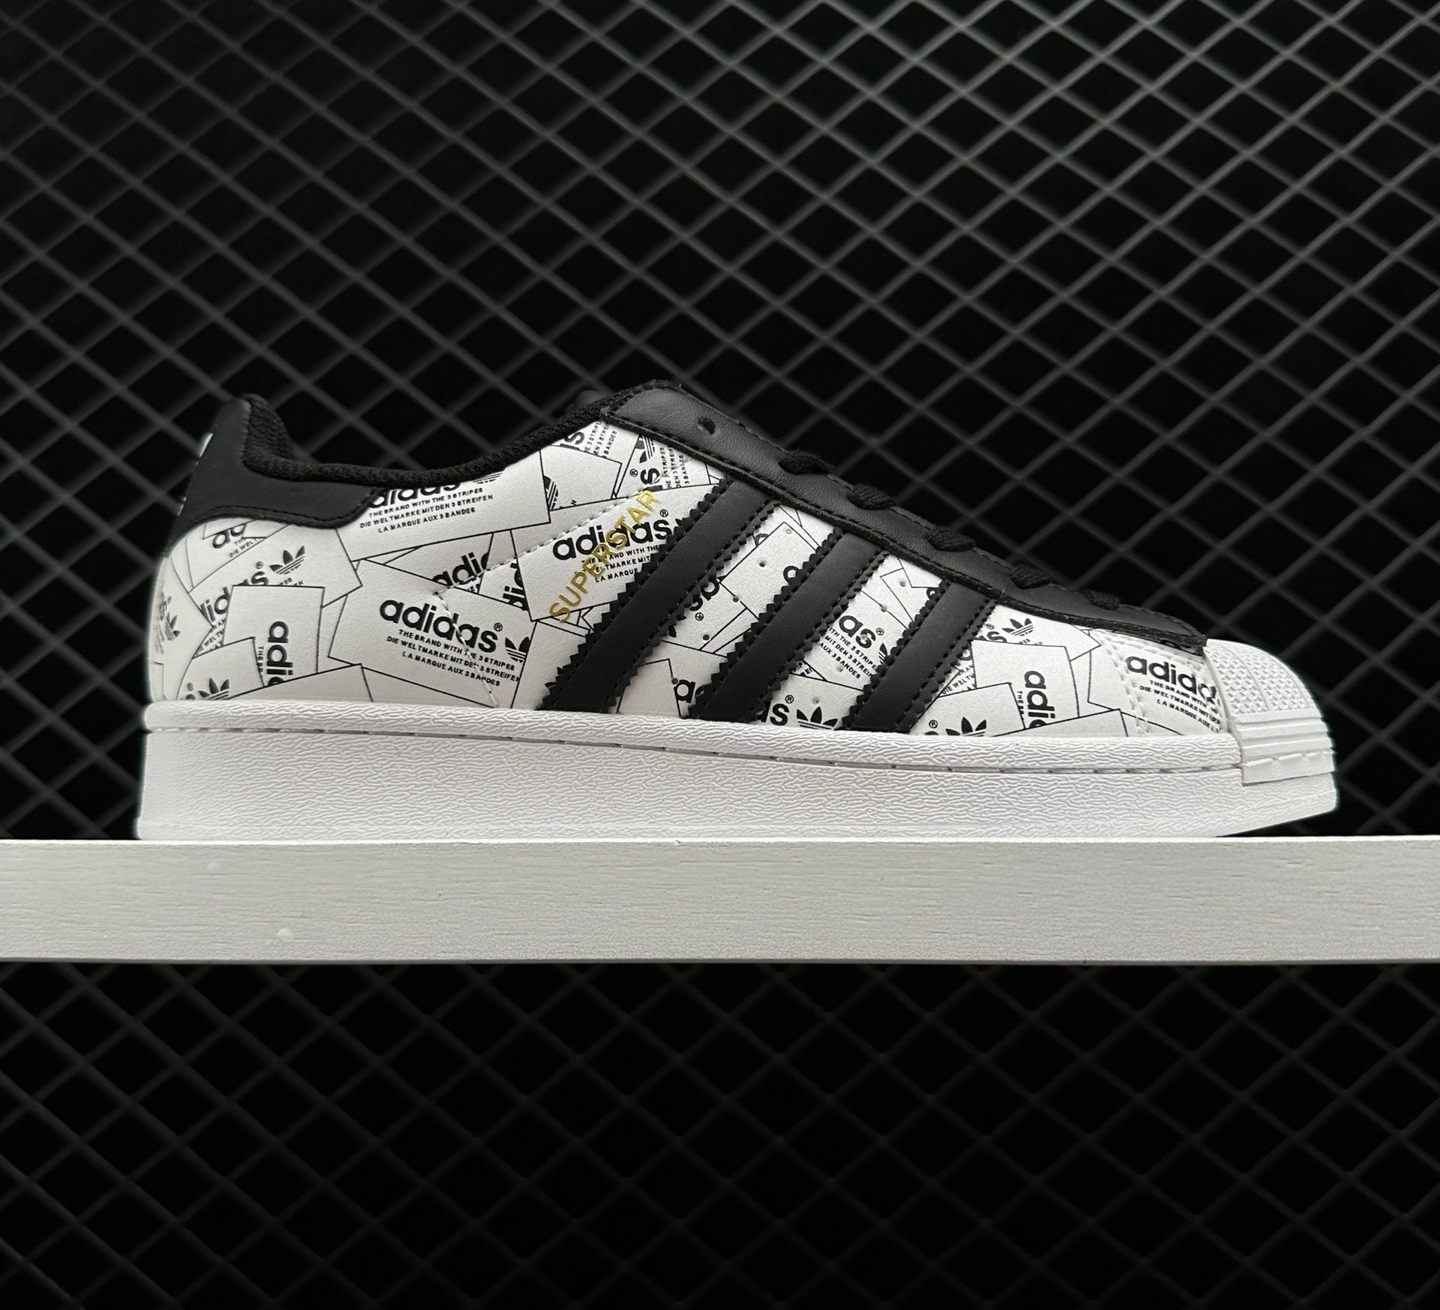 Adidas Superstar 'Label Collage' FV2819 - Stylish and Iconic Sneakers